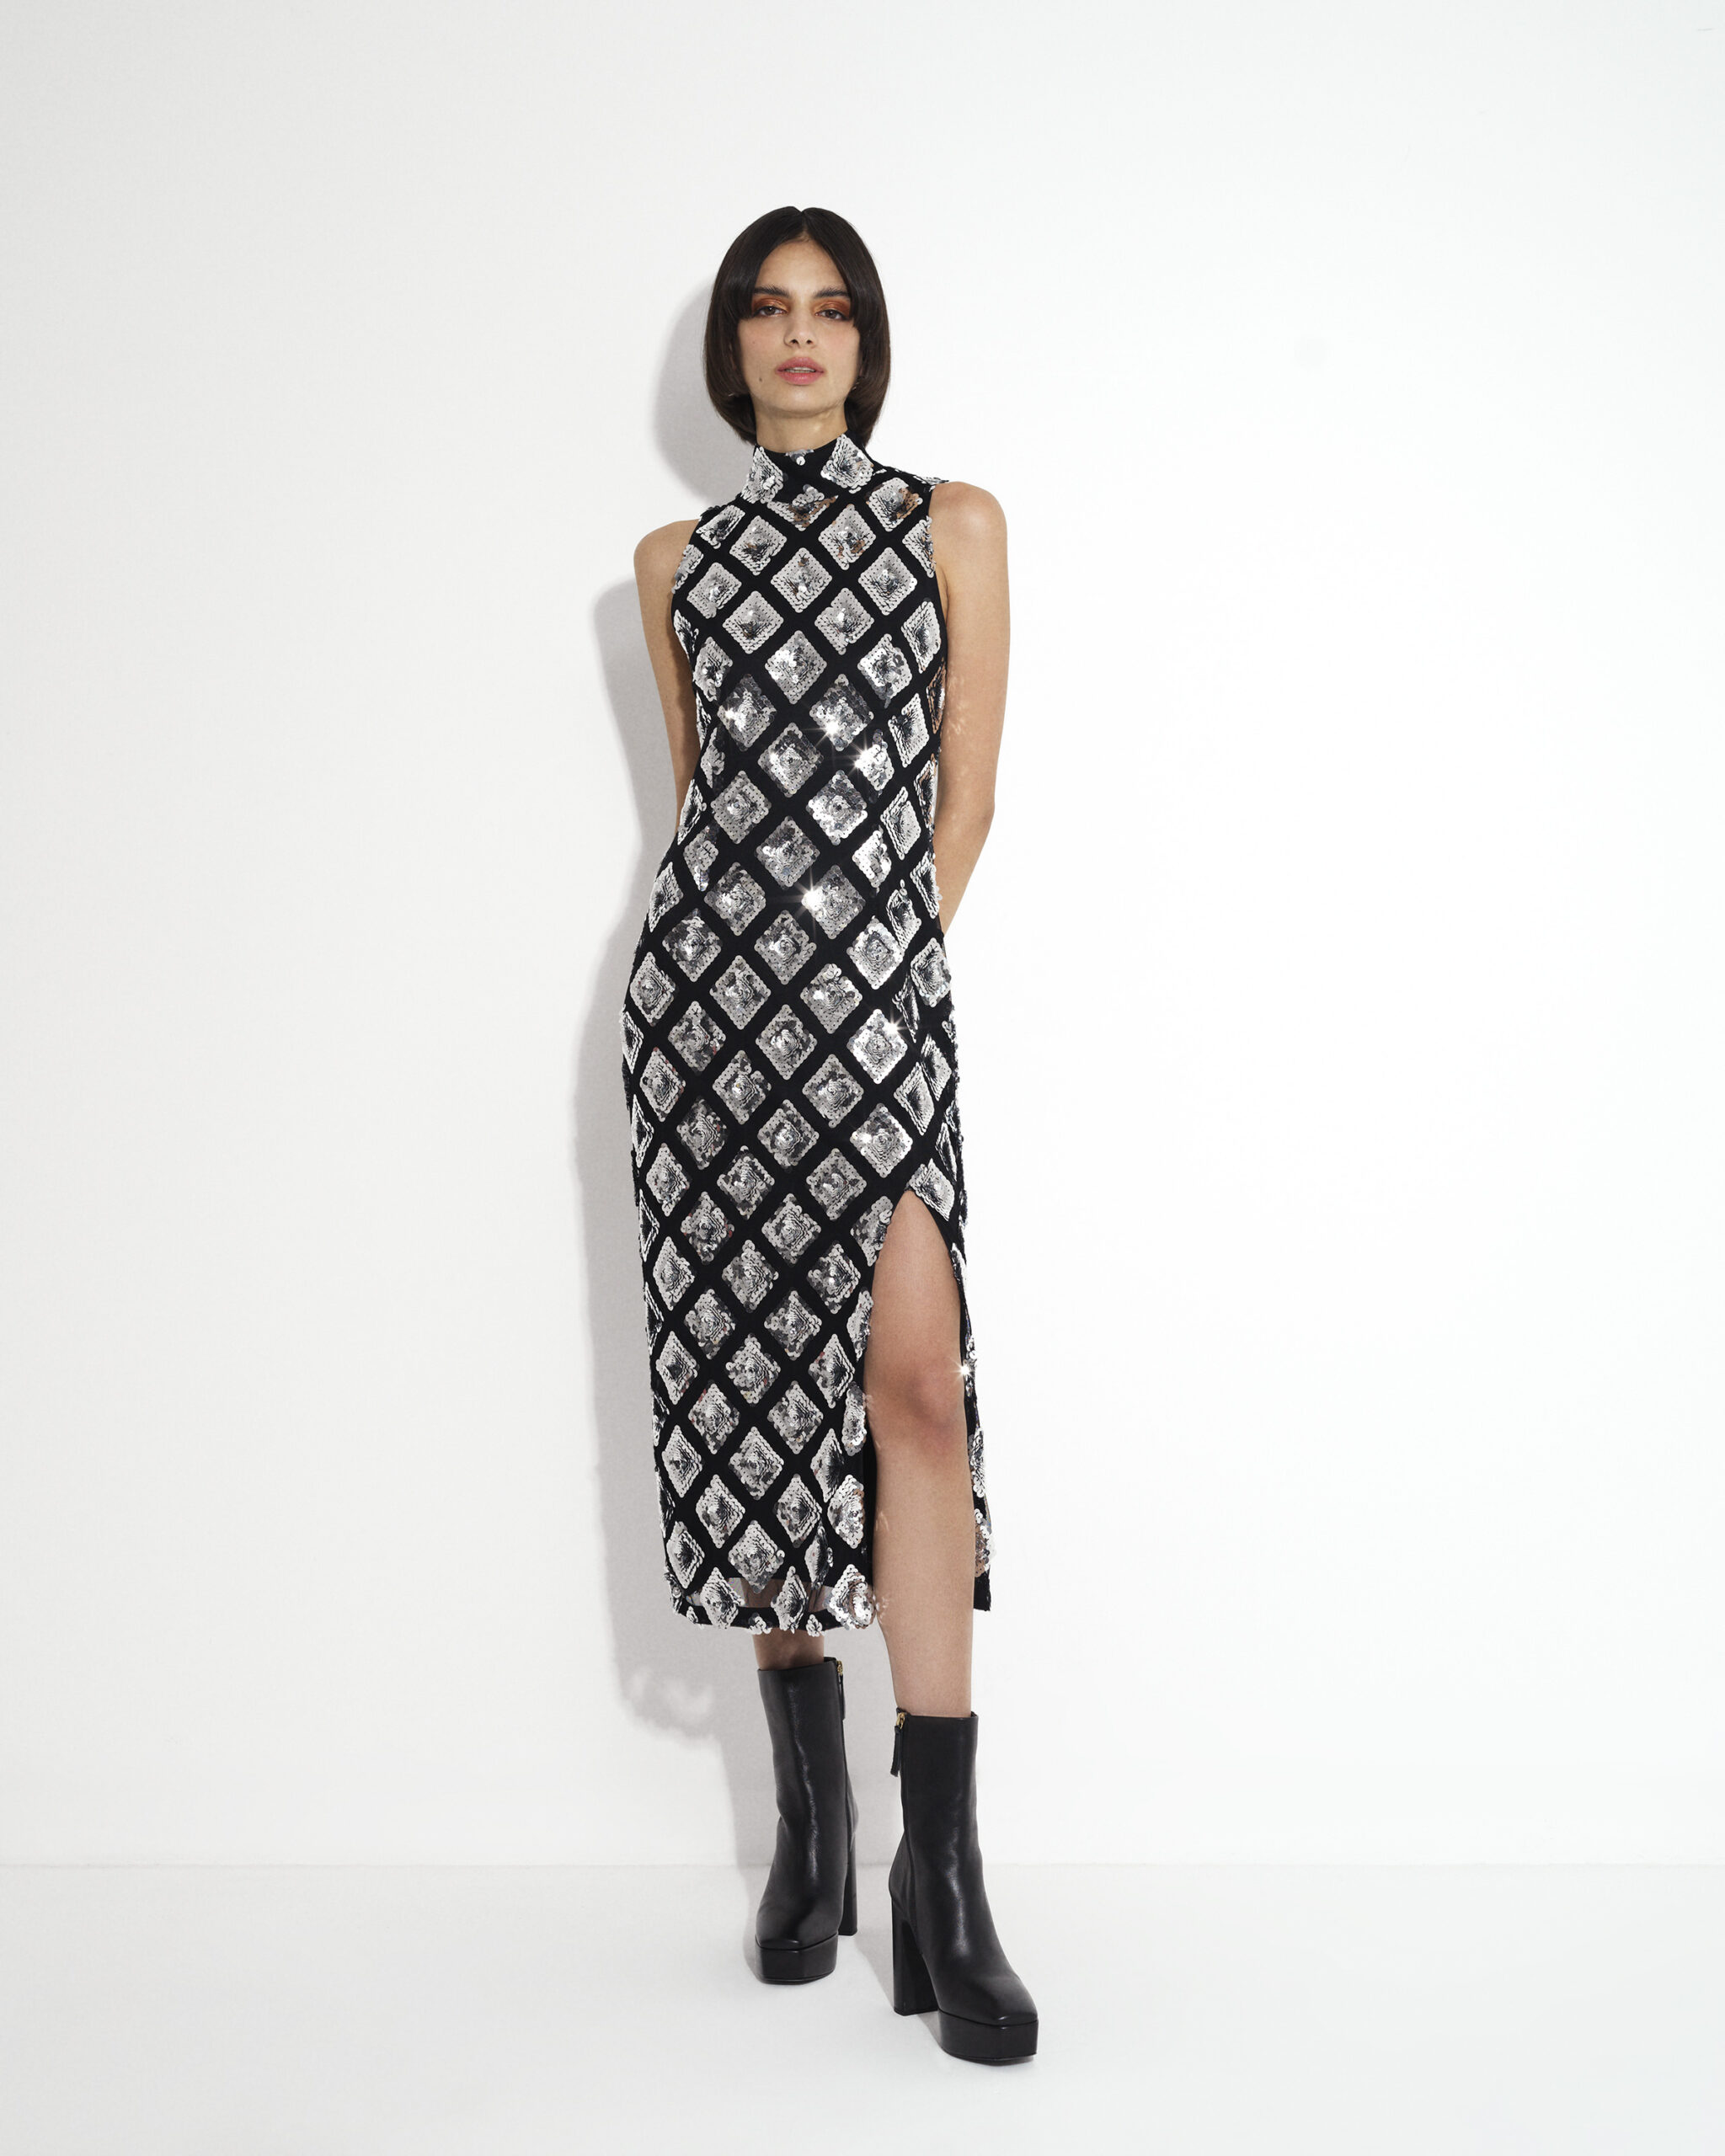 French Connection Axel Embellished Dress - Black/silver